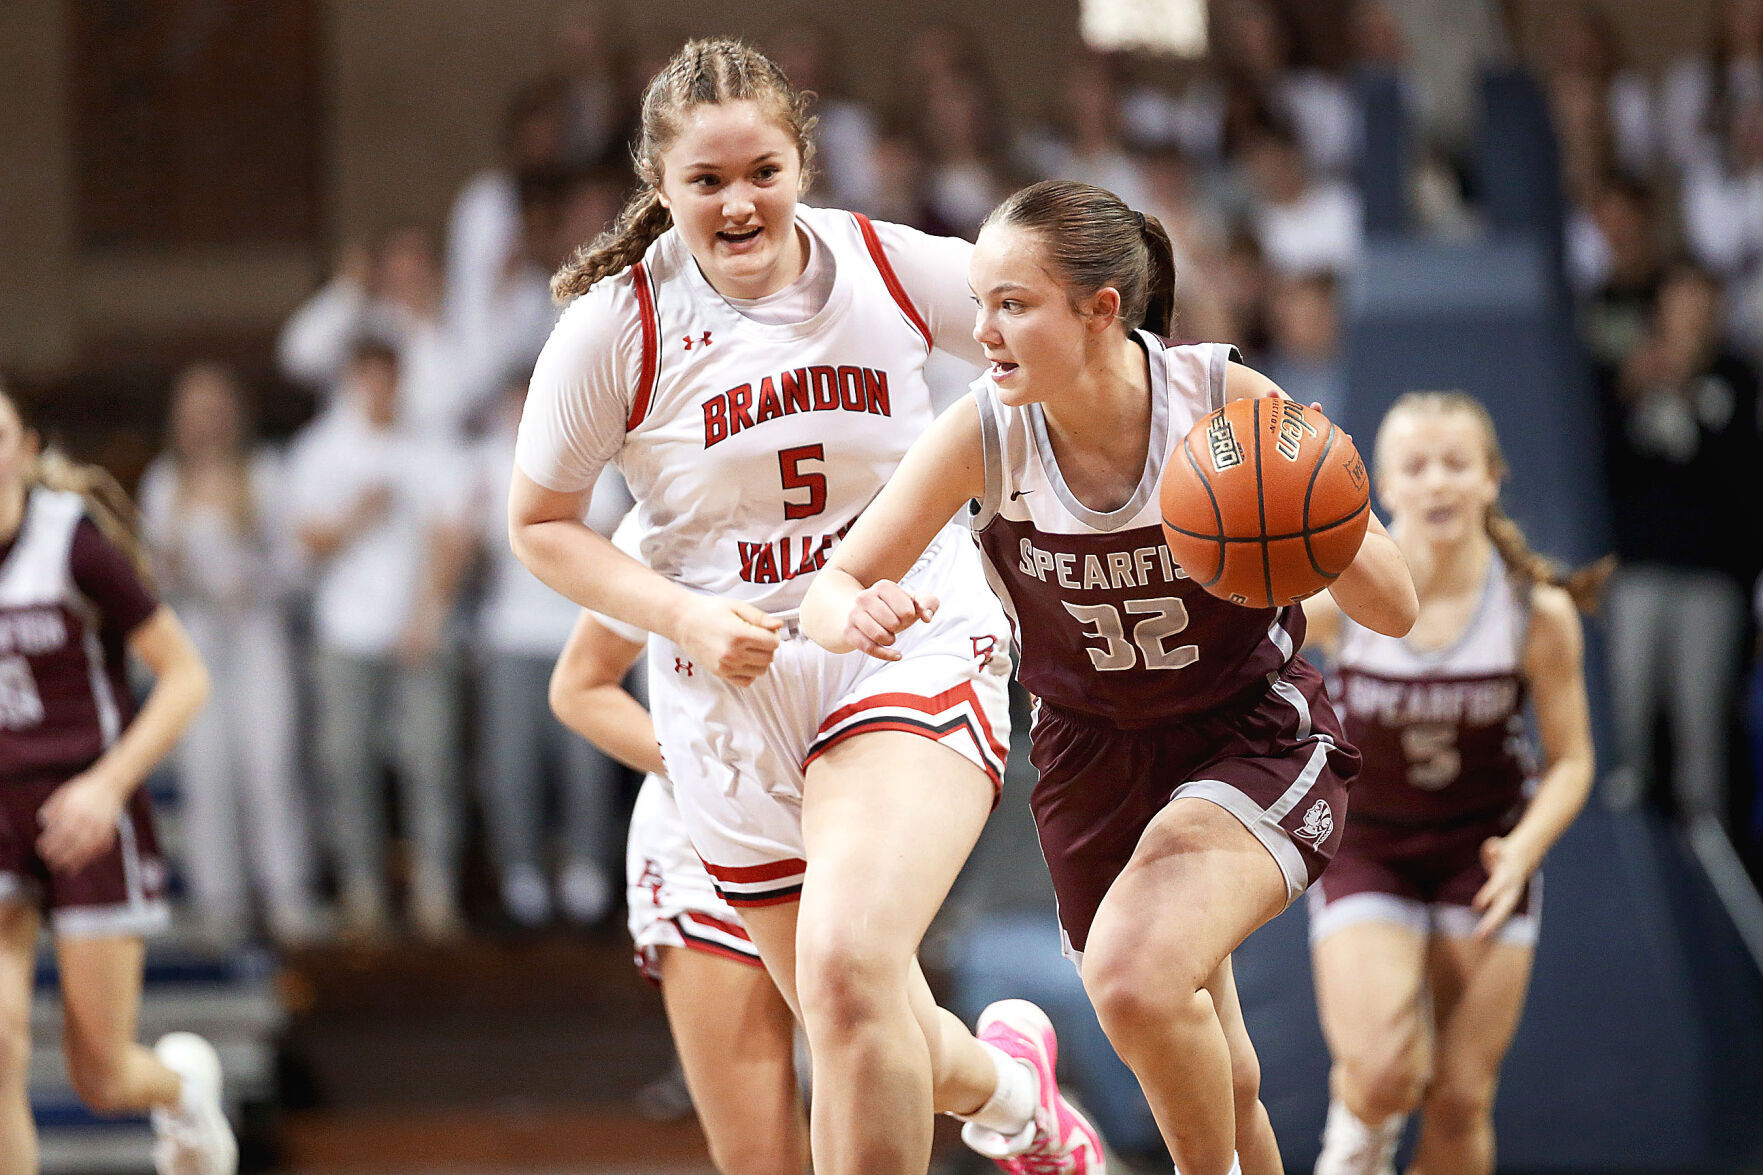 Brandon Valley Triumphs Over Spearfish in Class AA State Quarterfinals with Dominant Sharp-Shooting Performance